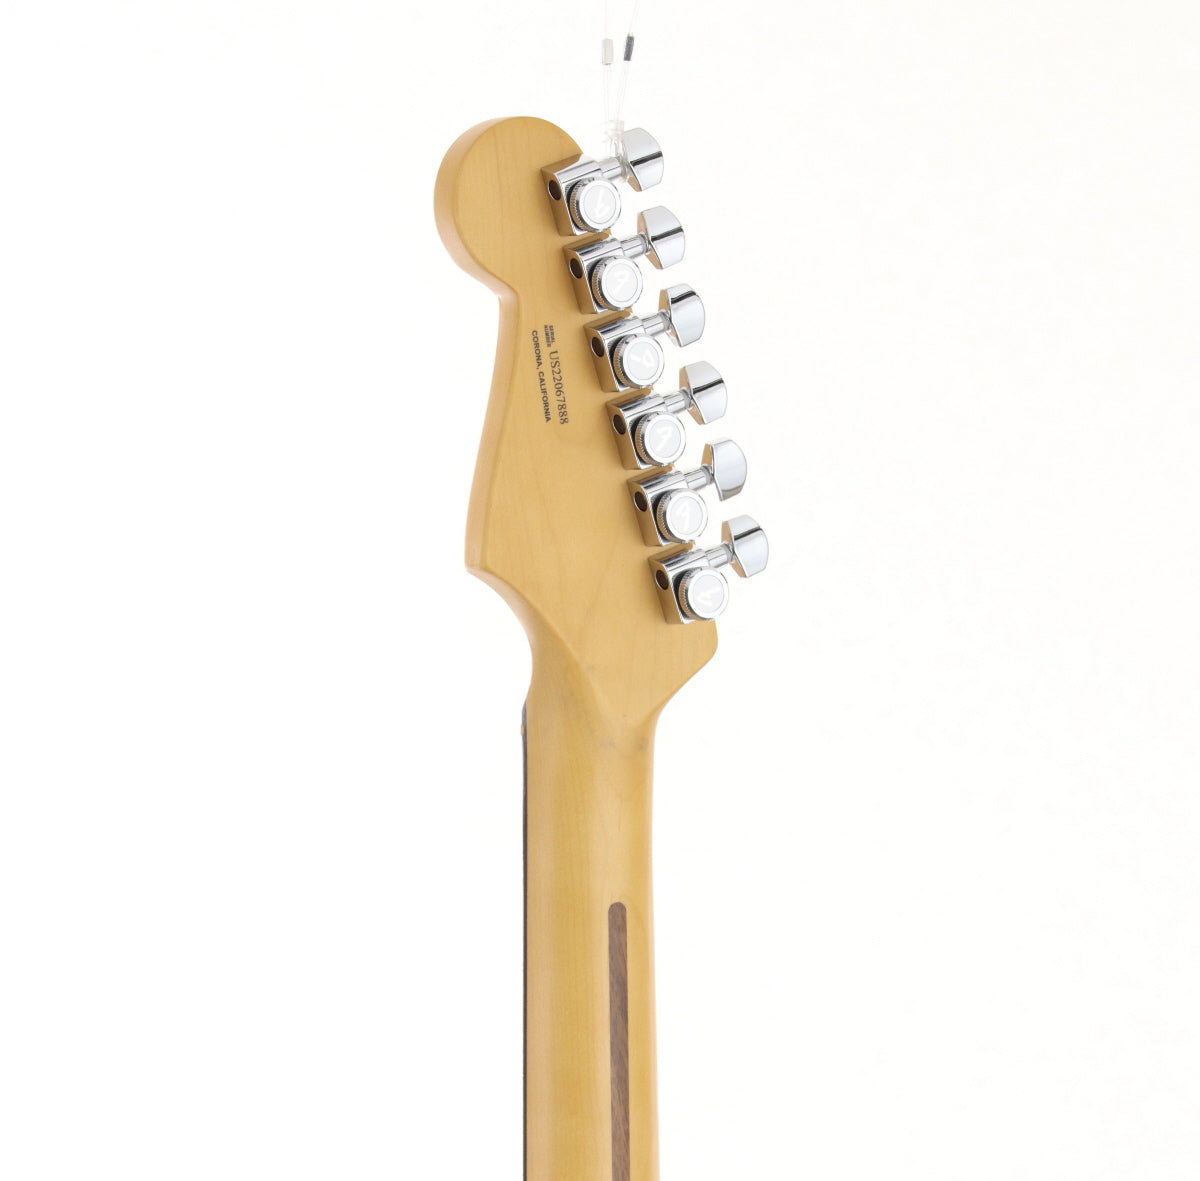 [SN US22067888] USED Fender Usa / American Ultra Stratocaster RW Arctic Pearl [03]